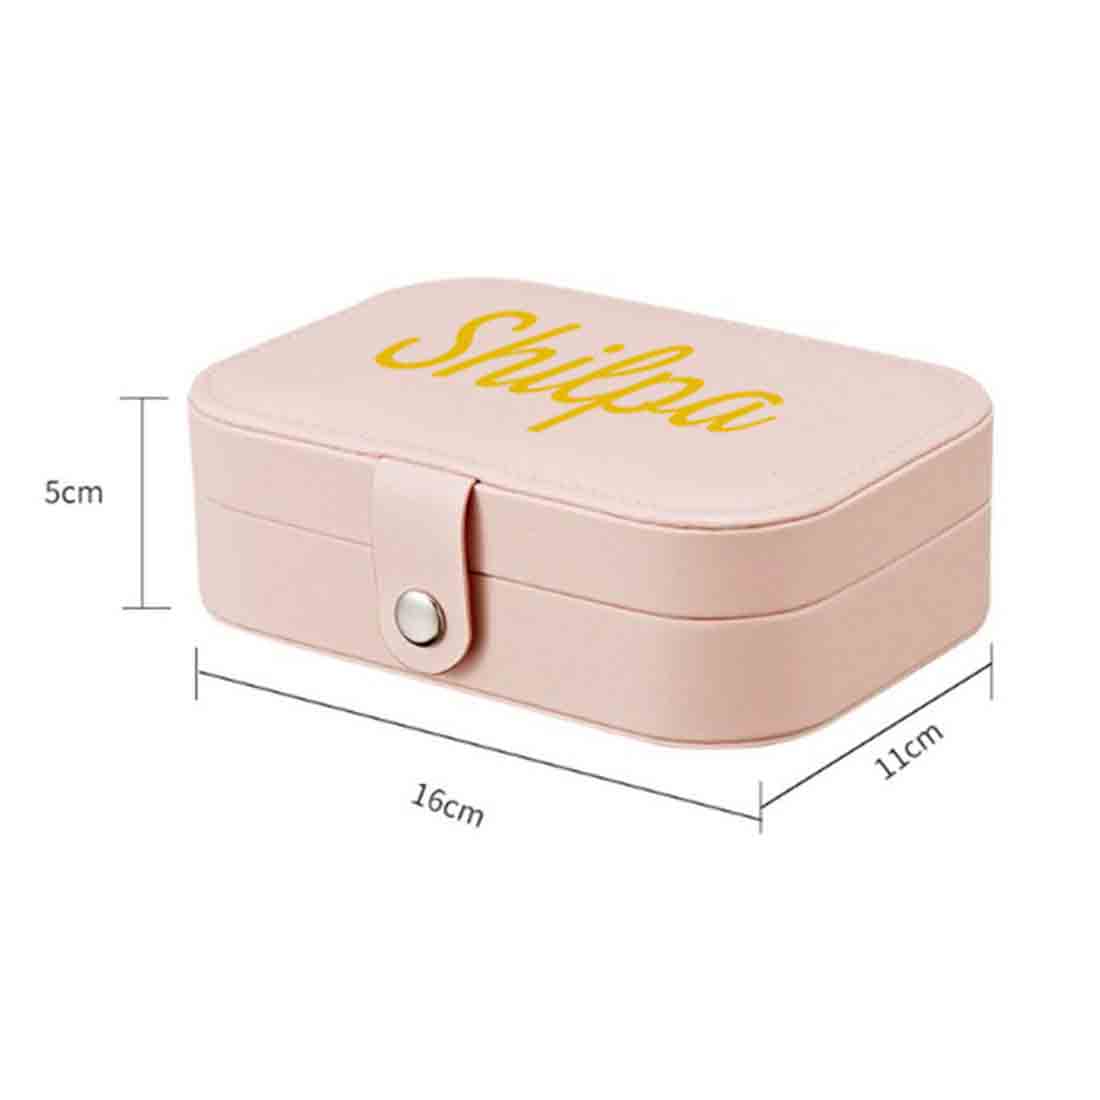 Customized Jewellery Box Holder for Travel Storage Case for Rings Earrings and Pendants